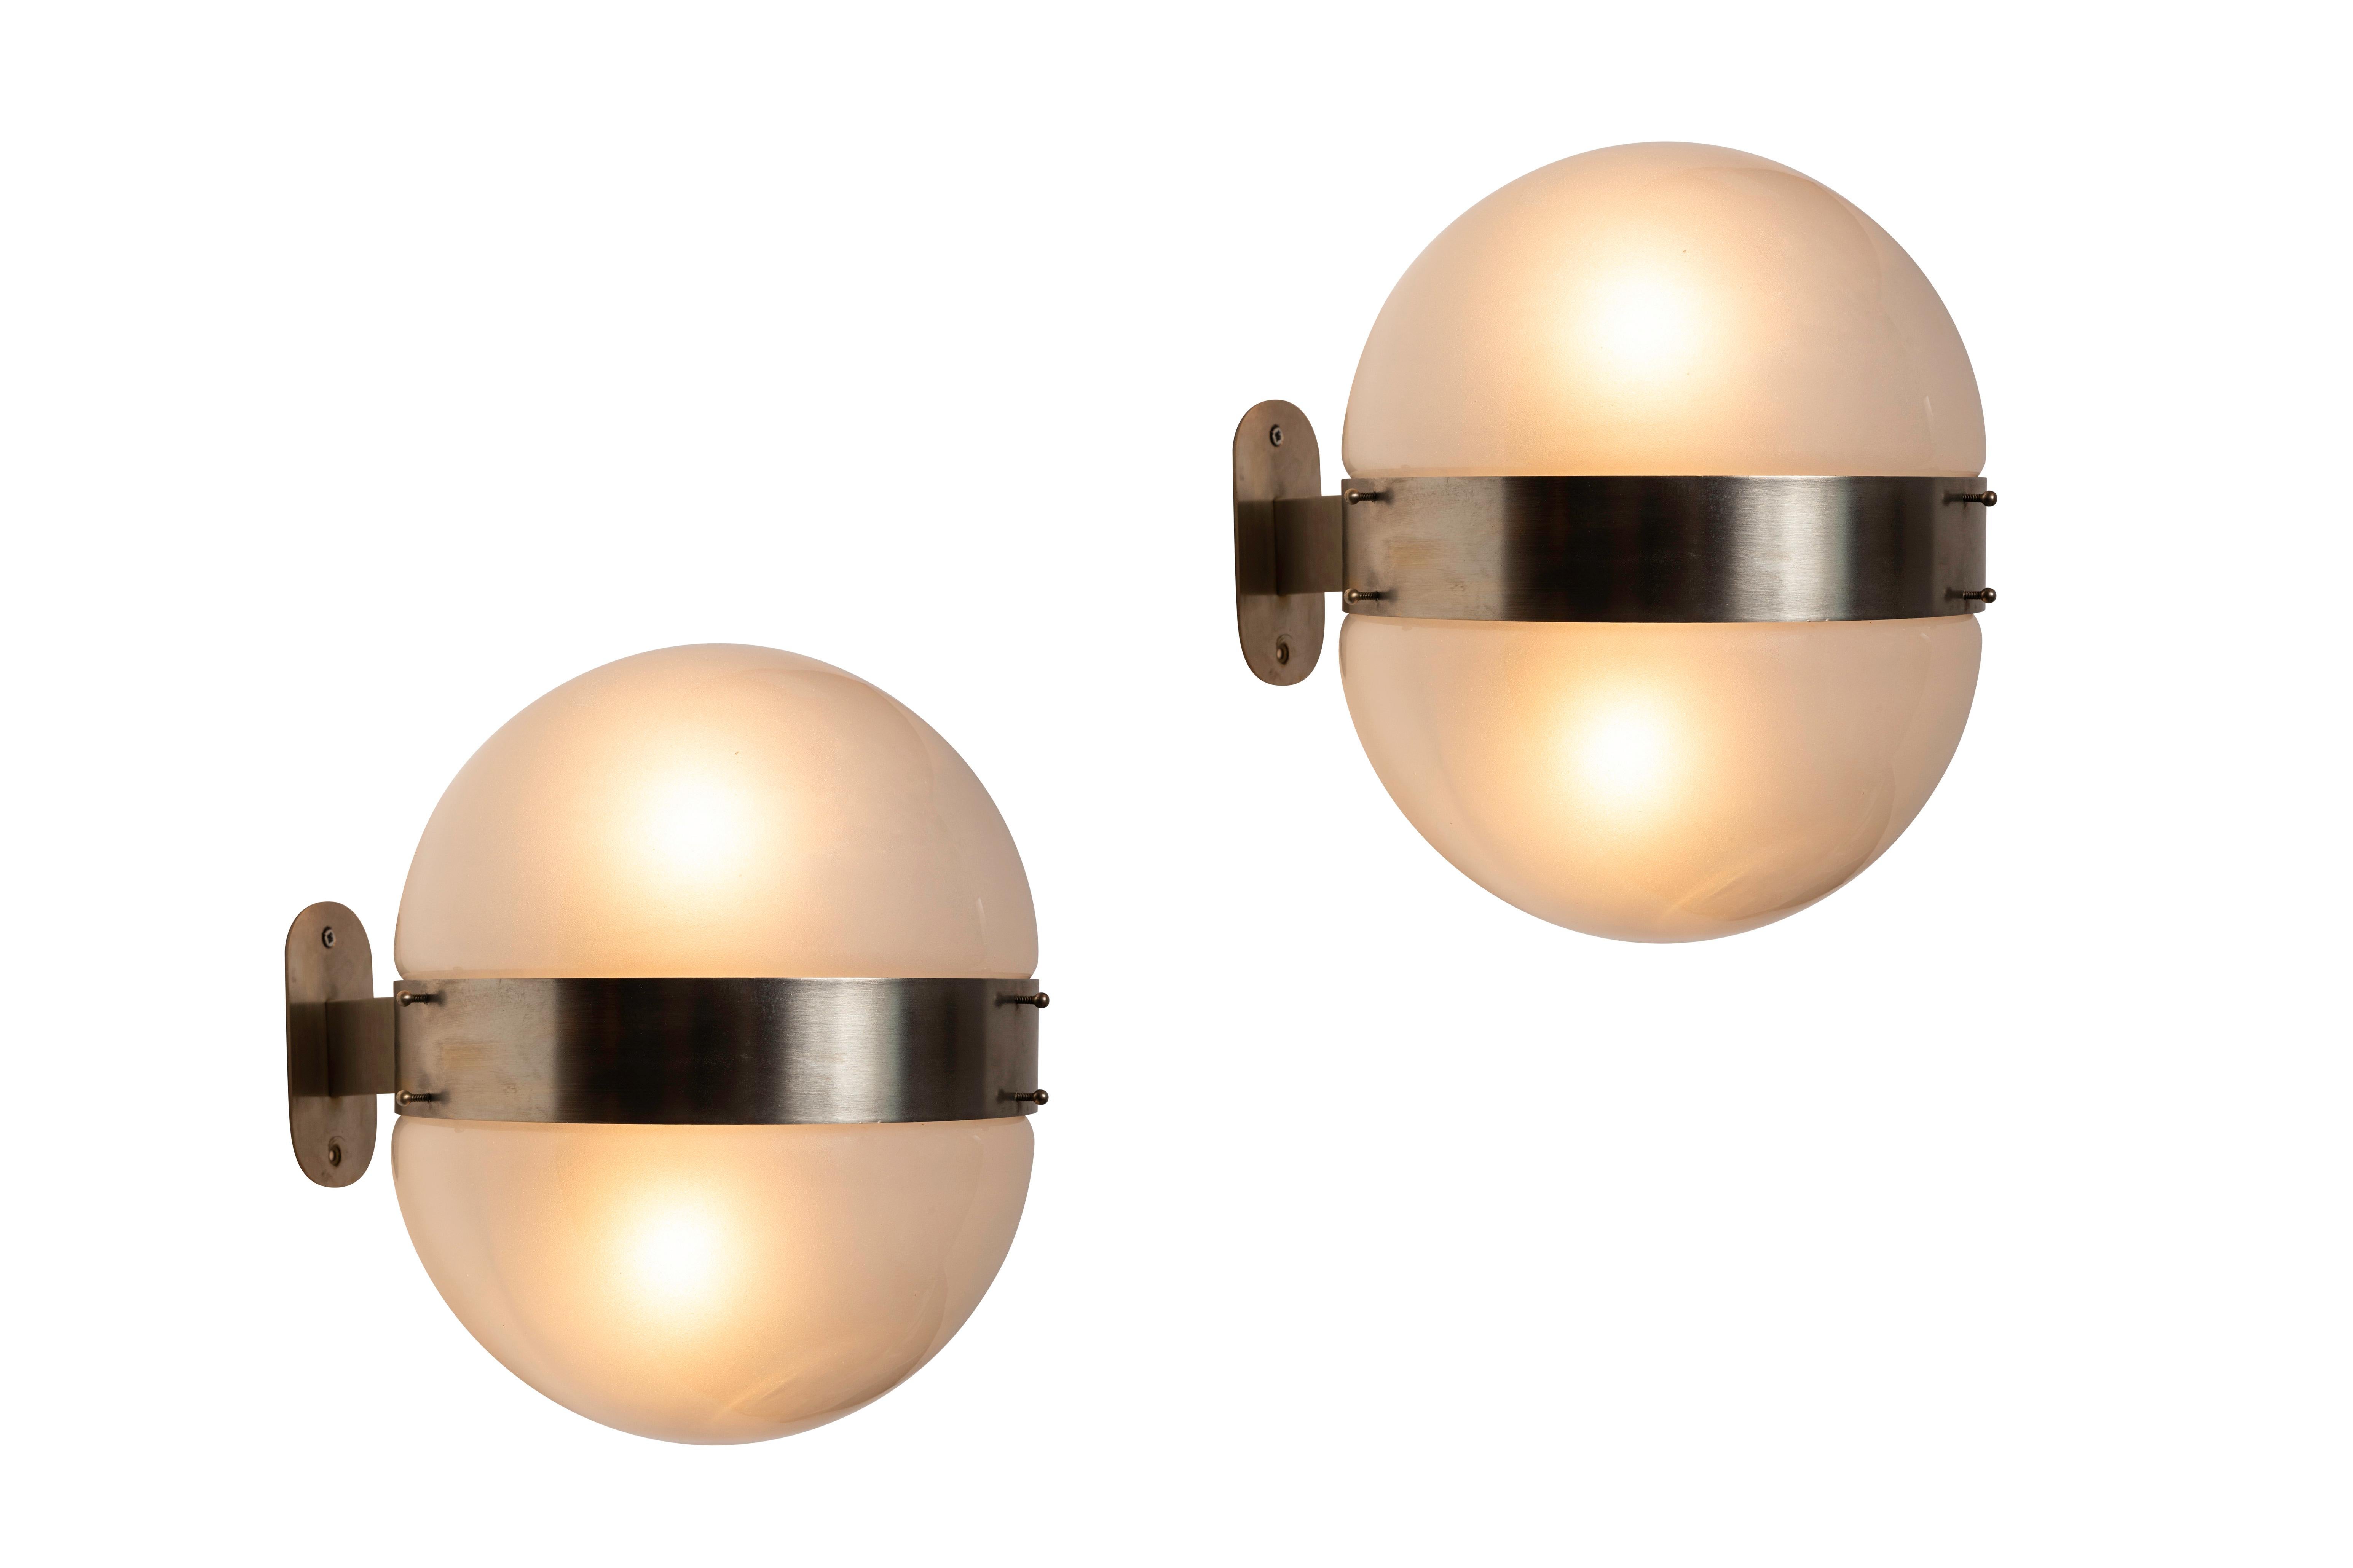 1960s Sergio Mazza 'Clio' sconce for Artemide. Executed in nickeled brass and opaline glass, Italy, circa 1960s. Clean and architectural, these hardwired sconces emit a pleasingly filtered light through its double glass shades.

Price is per item. 2